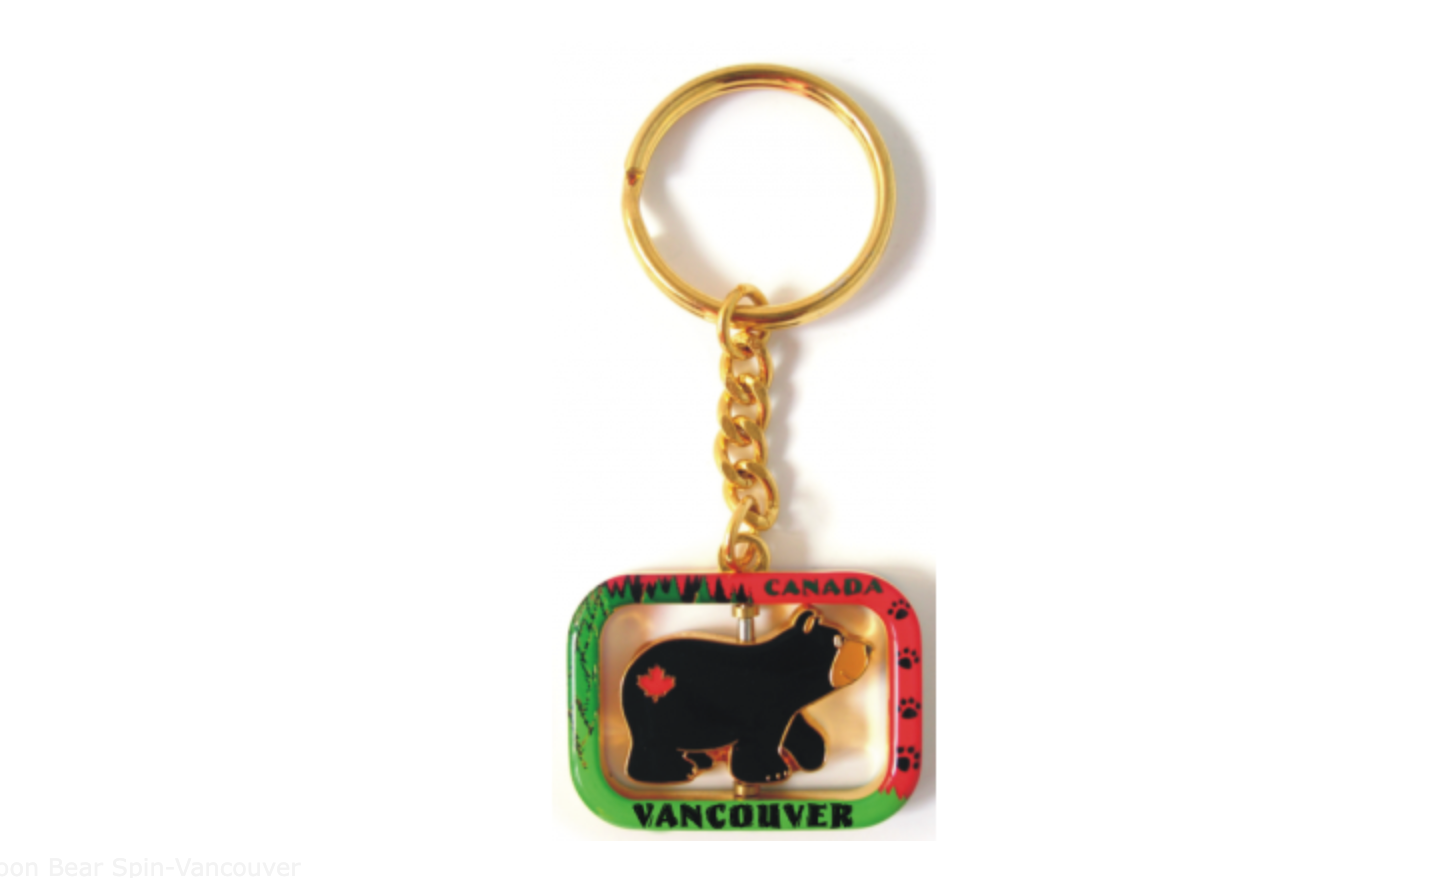 Adorable cartoon bear key chain featuring a Vancouver design, perfect for adding a touch of charm to your keys or bags